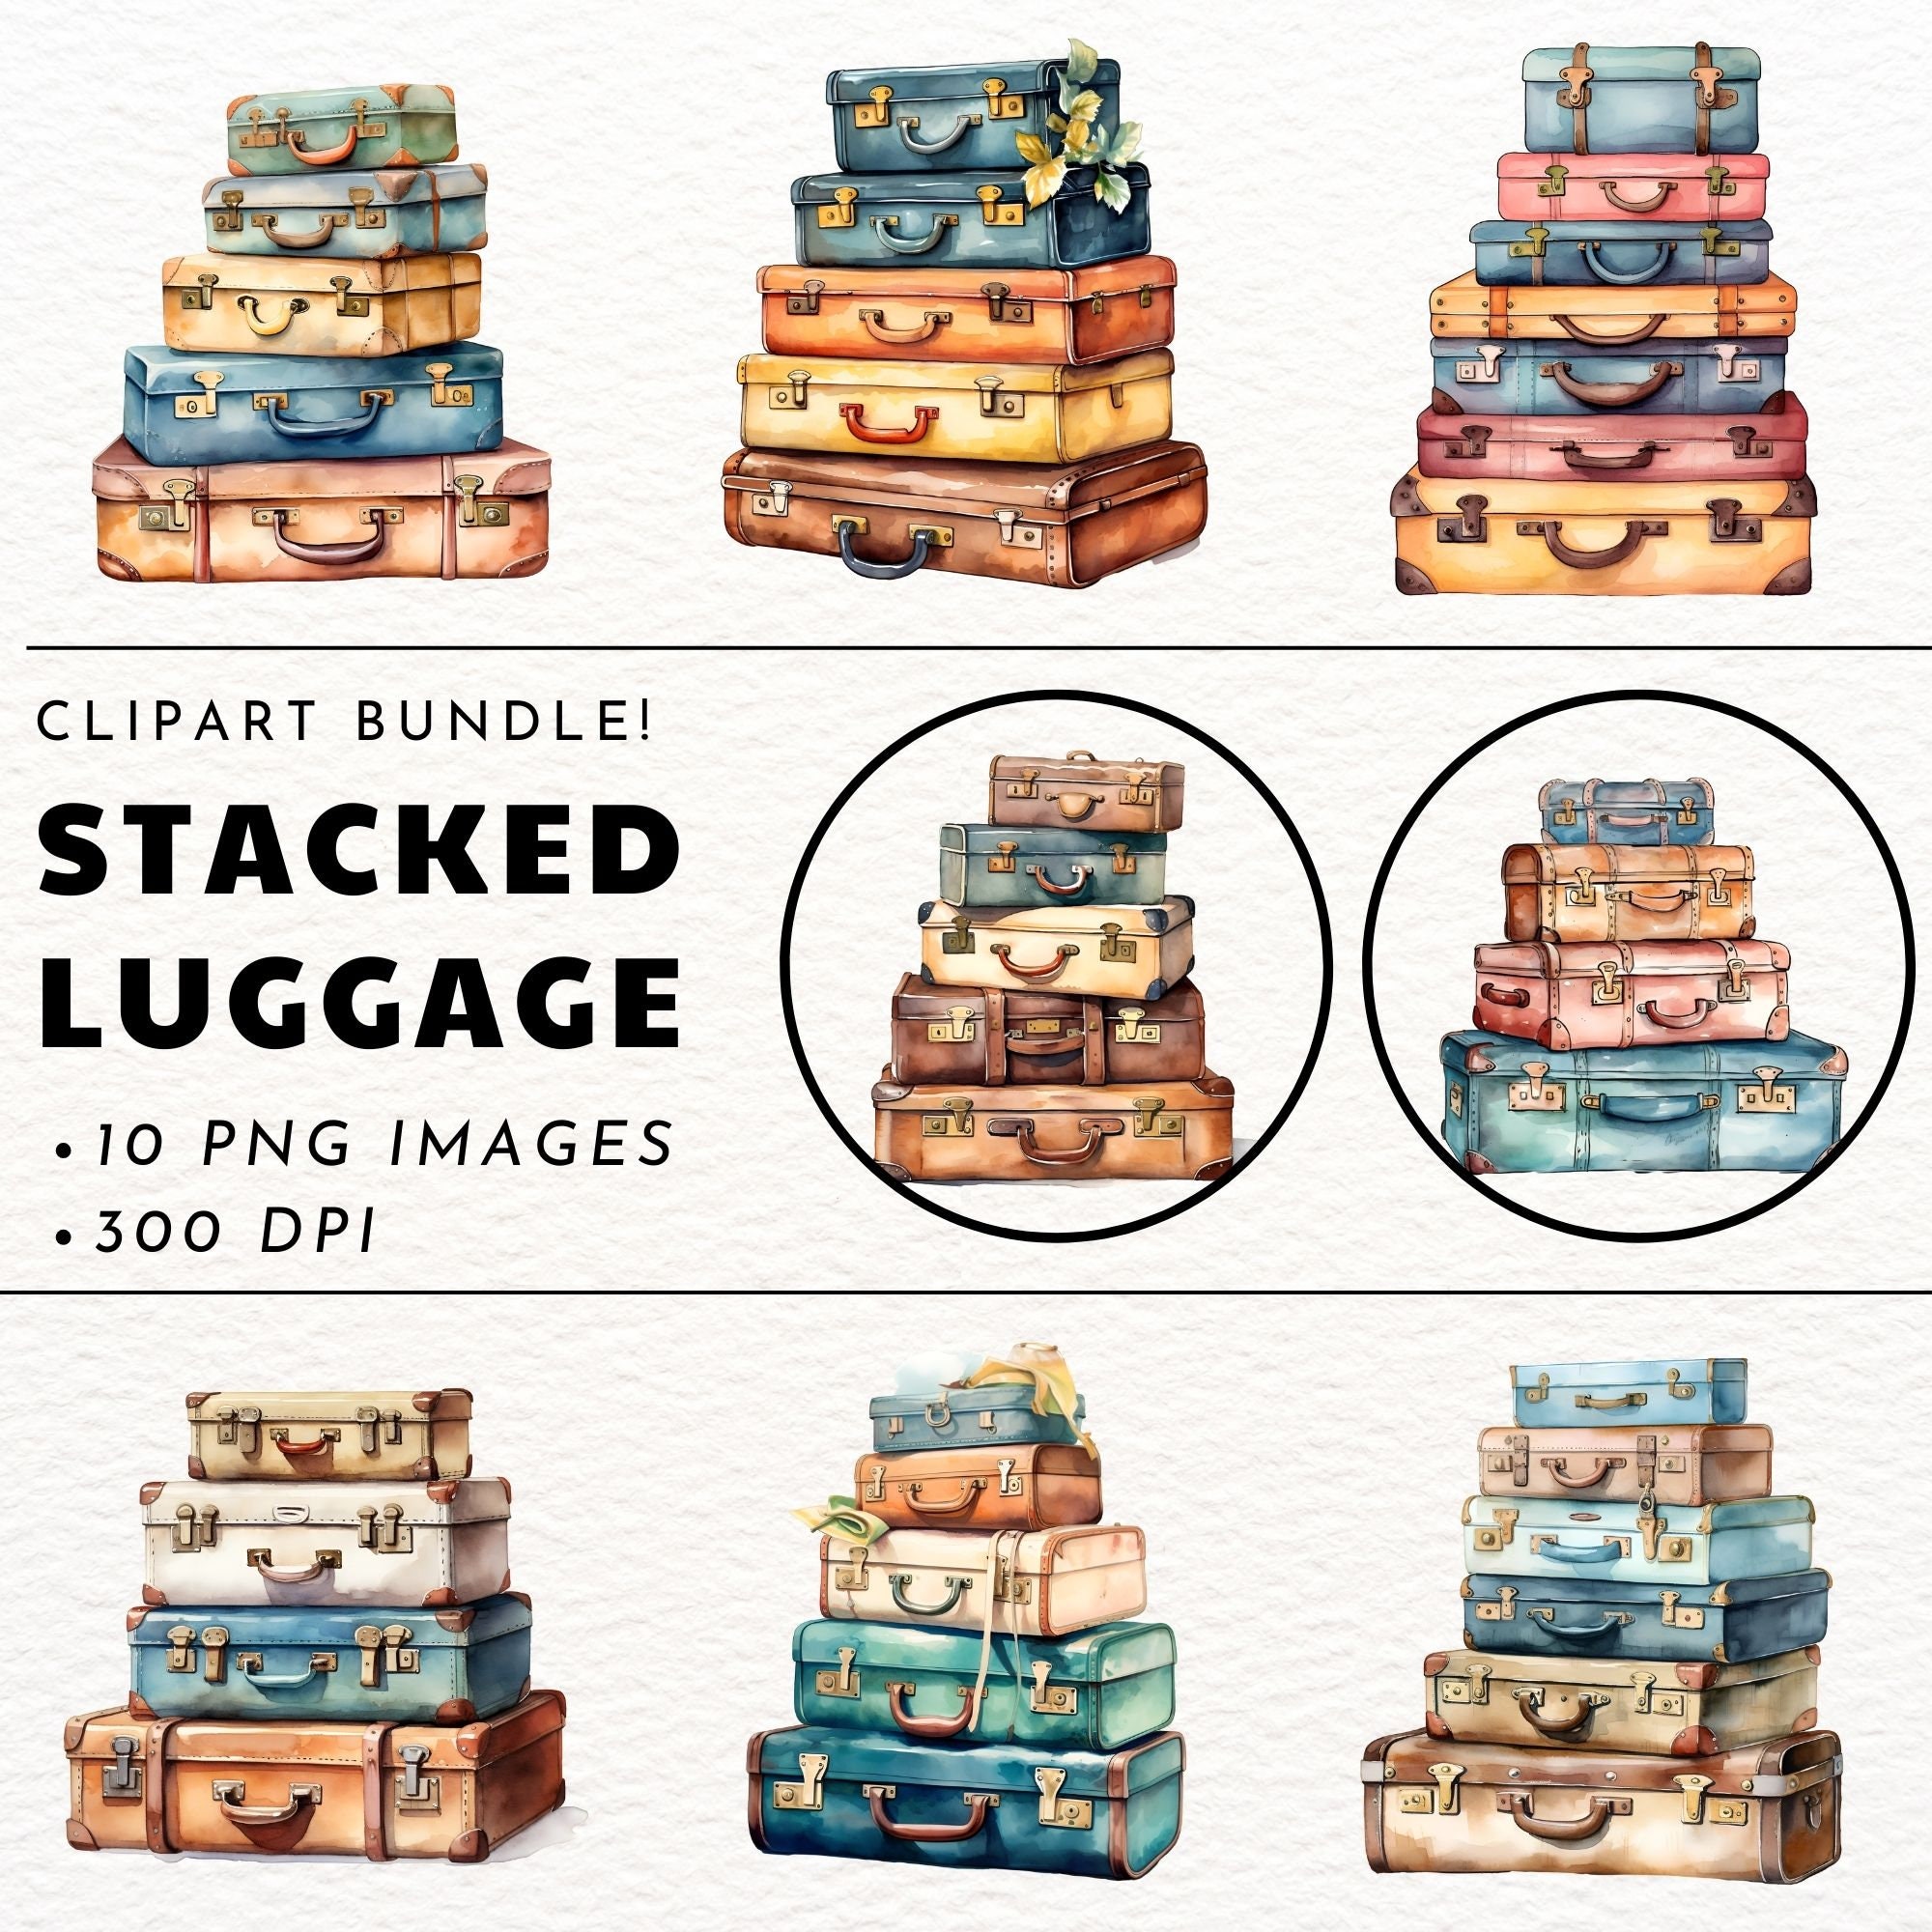 Vintage Suitcase Watercolor Clipart Graphic by LQ Design · Creative Fabrica